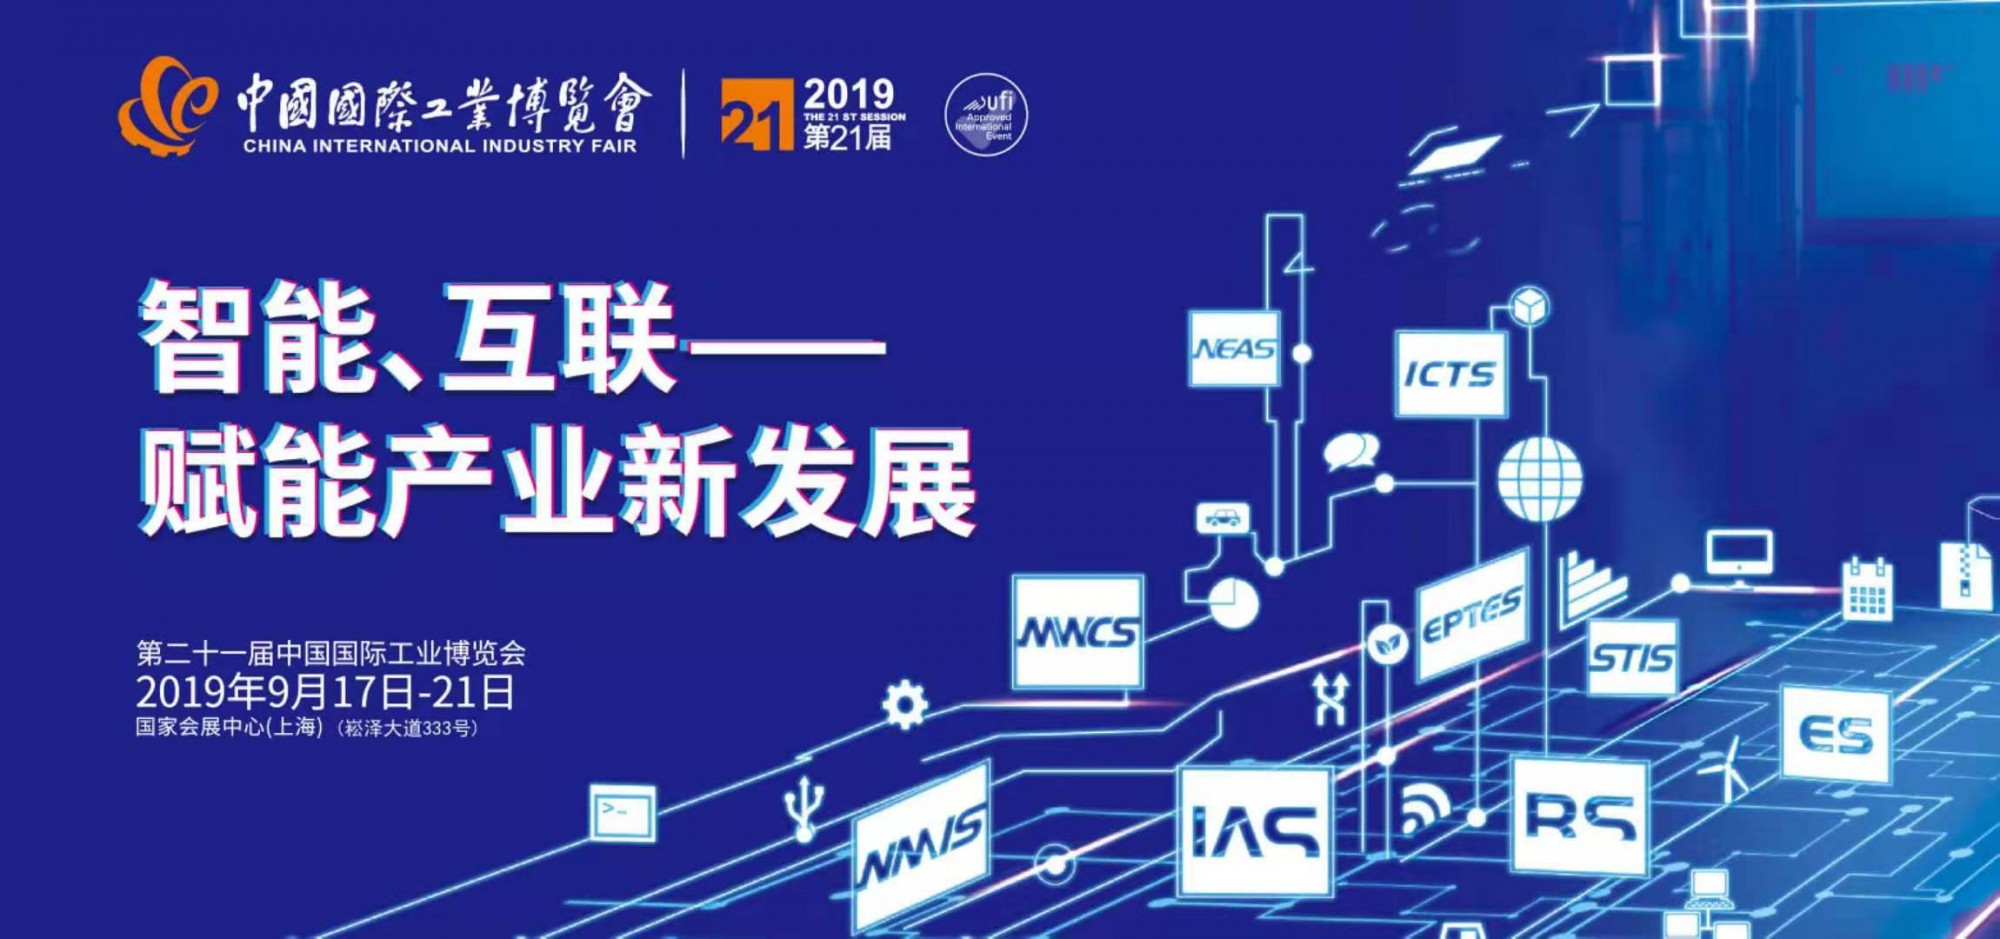 The 21st China International Industrial Expo 2019